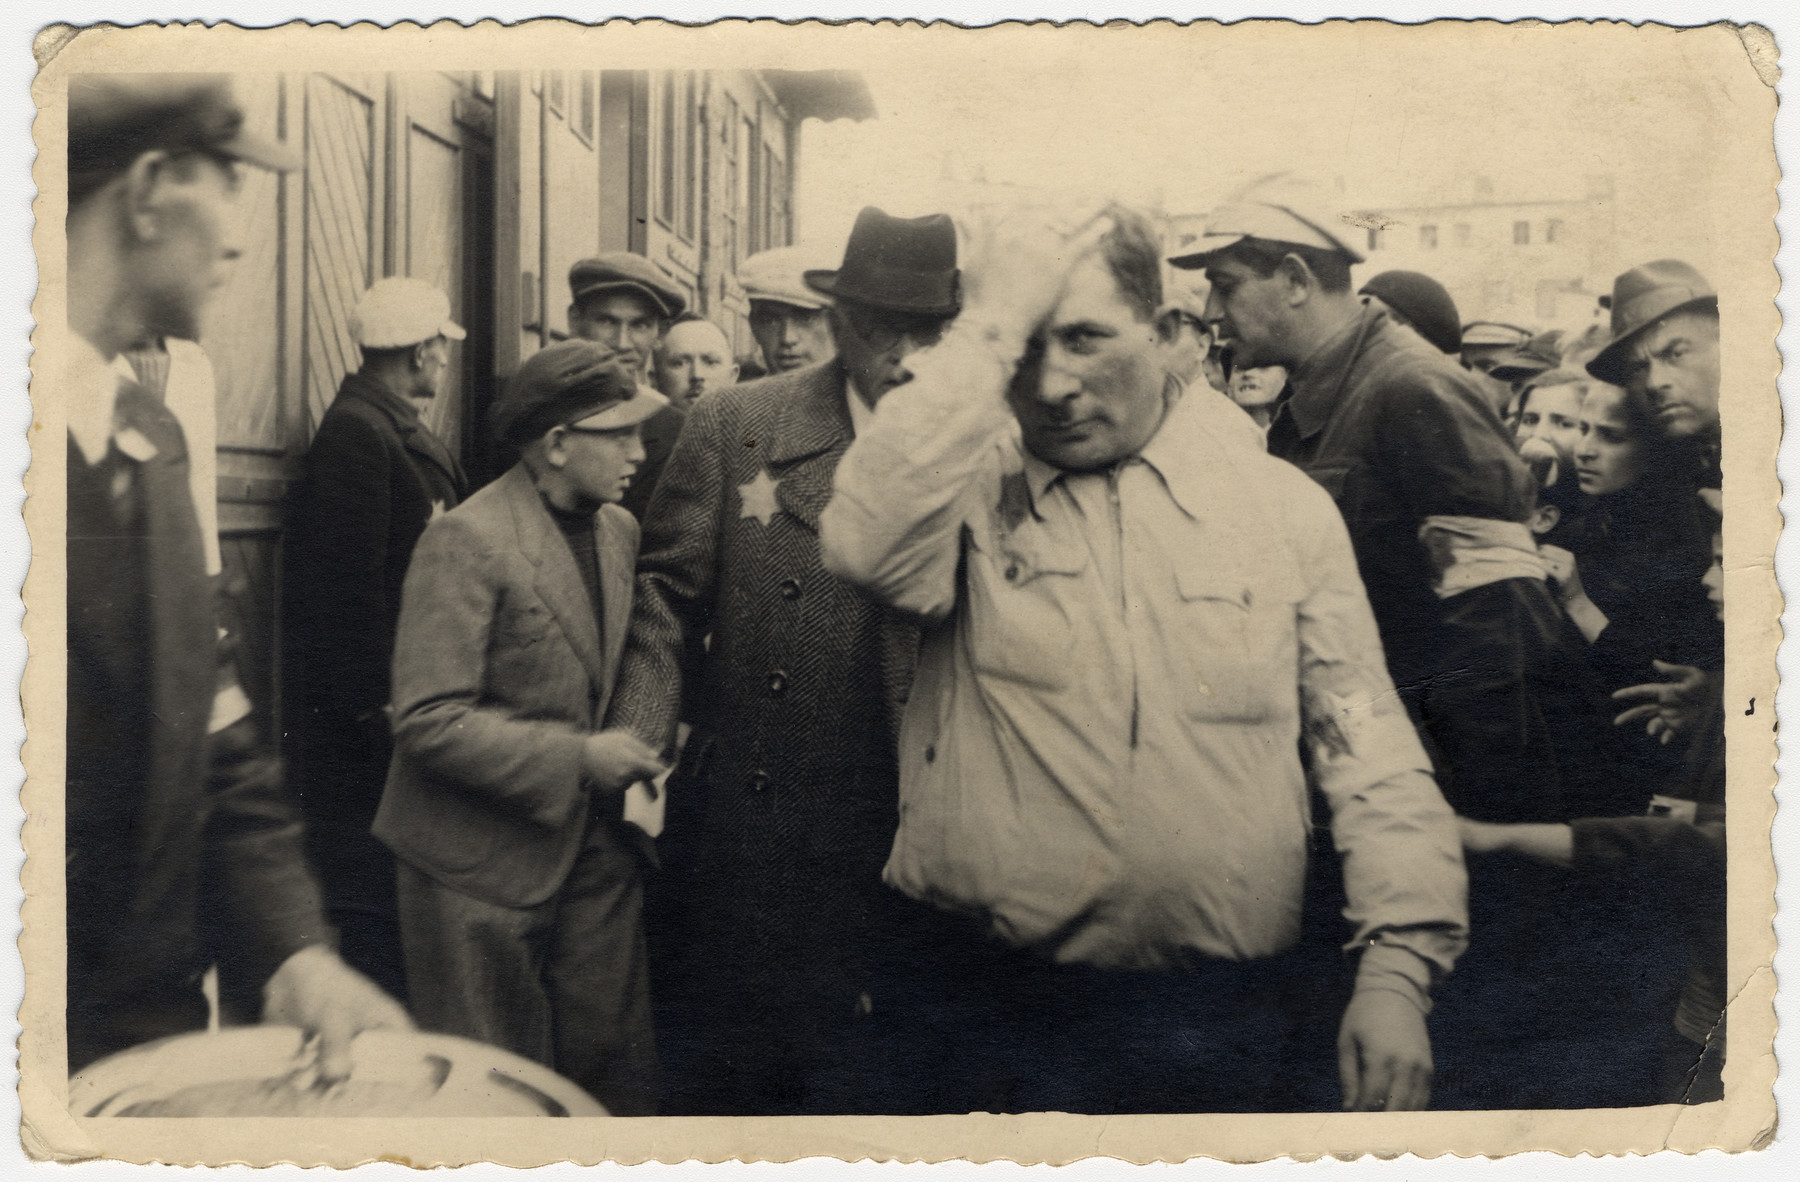 A young man hands a petition to Mordechai Chaim Rumkowski surrounded by other ghetto residents. 

The man in the foreground is Sergeant Kaufman.

The Yiddish inscription on the back reads: "Sergeant Kaufman from the Jewish guard, here protecting the Chairman M.Ch. Rumkowski, who allowed a chosen child to approach him with a petition.  August 17, 1941"